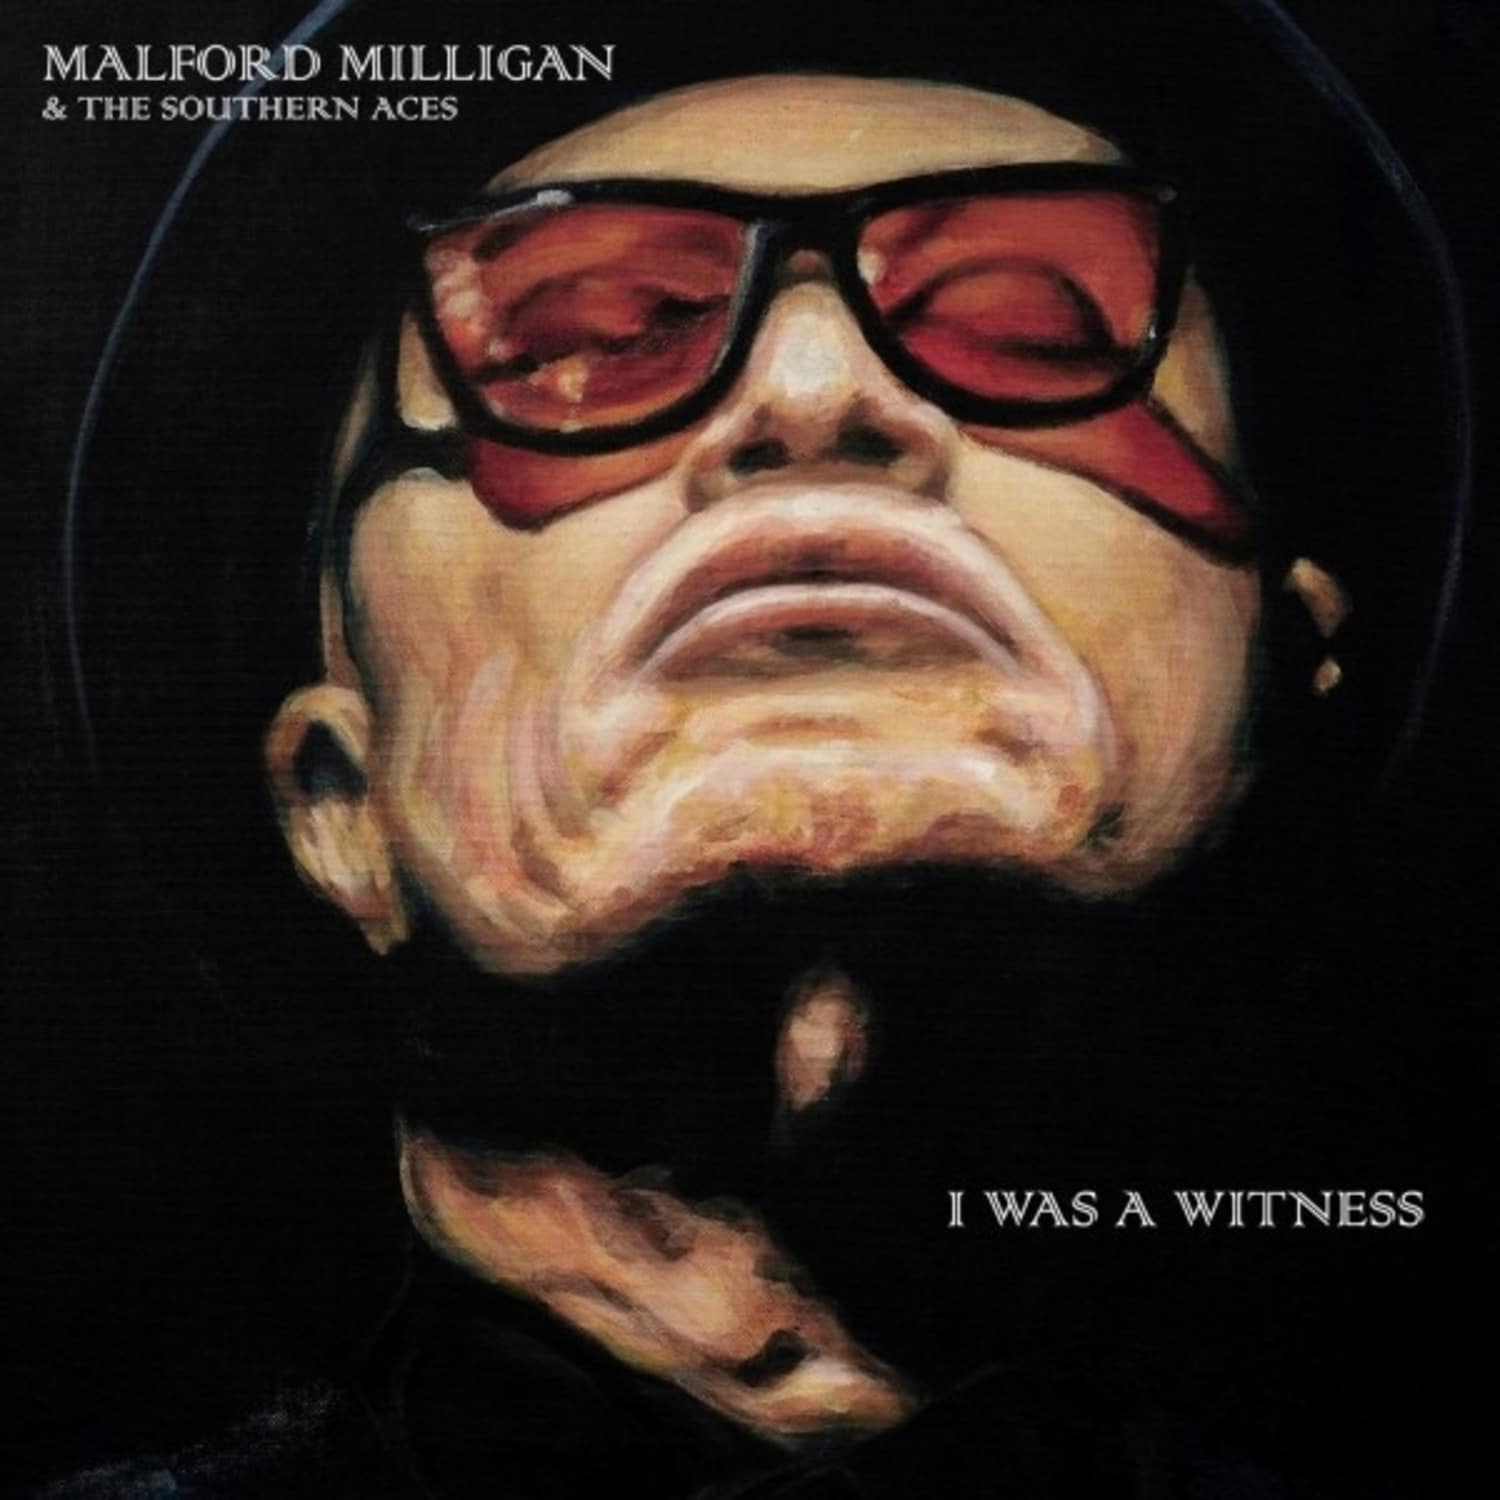 Malford Milligan - I WAS A WITNESS 